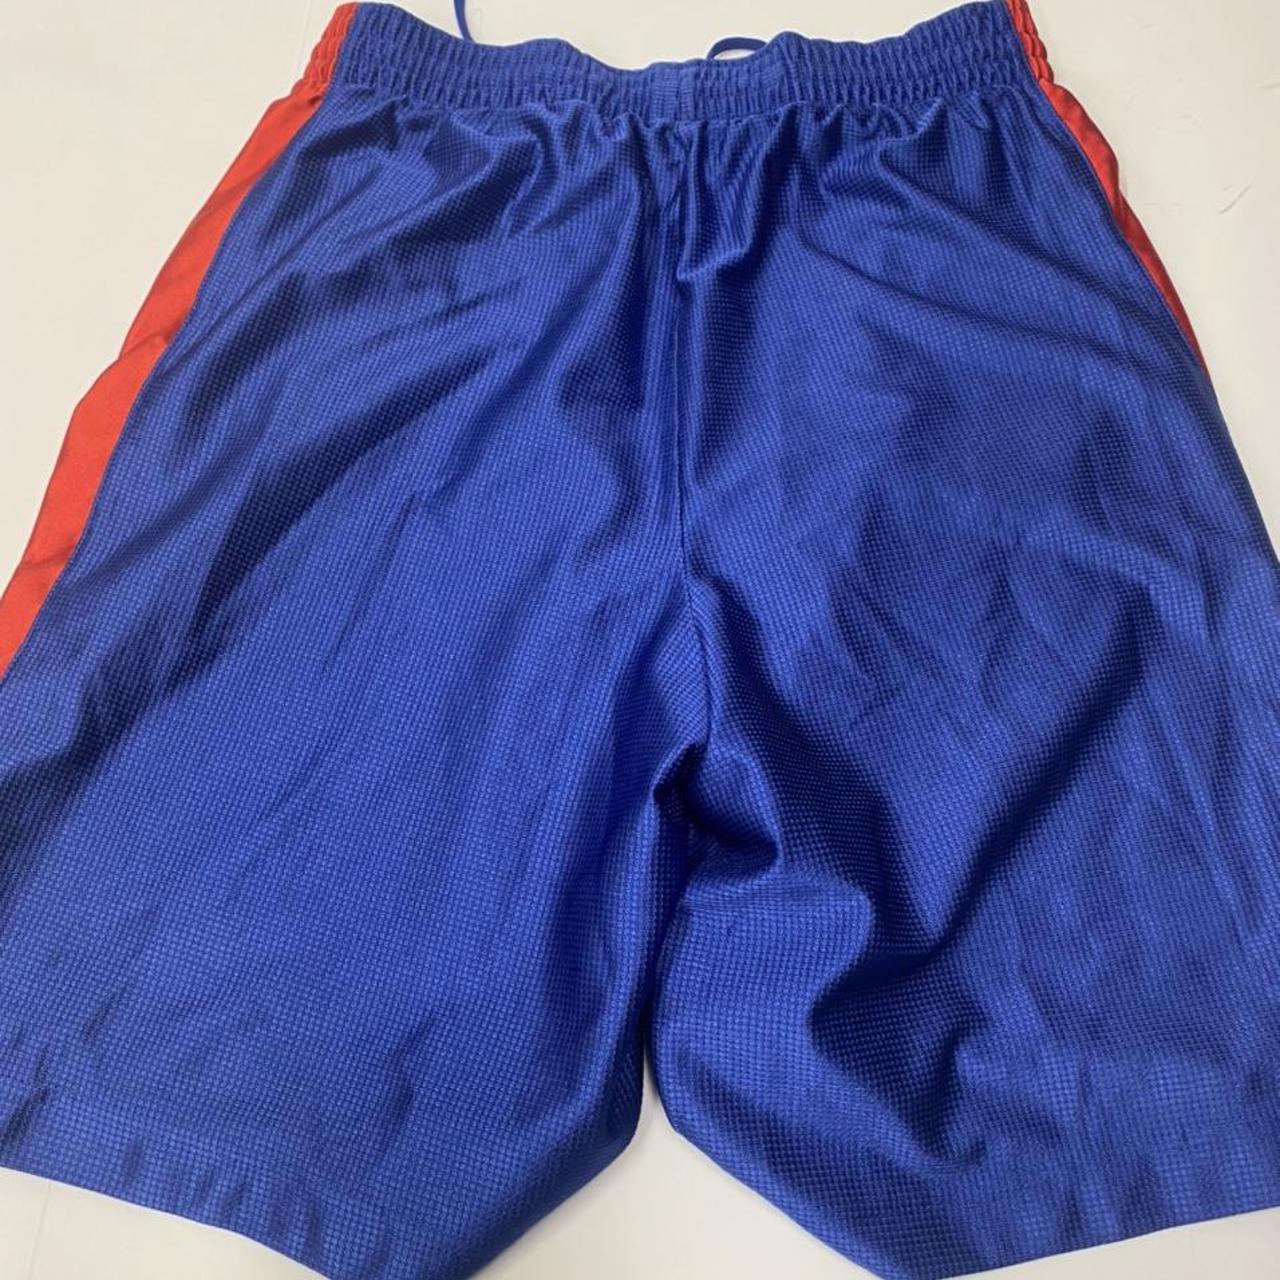 Nike Men's Red and Blue Shorts (3)